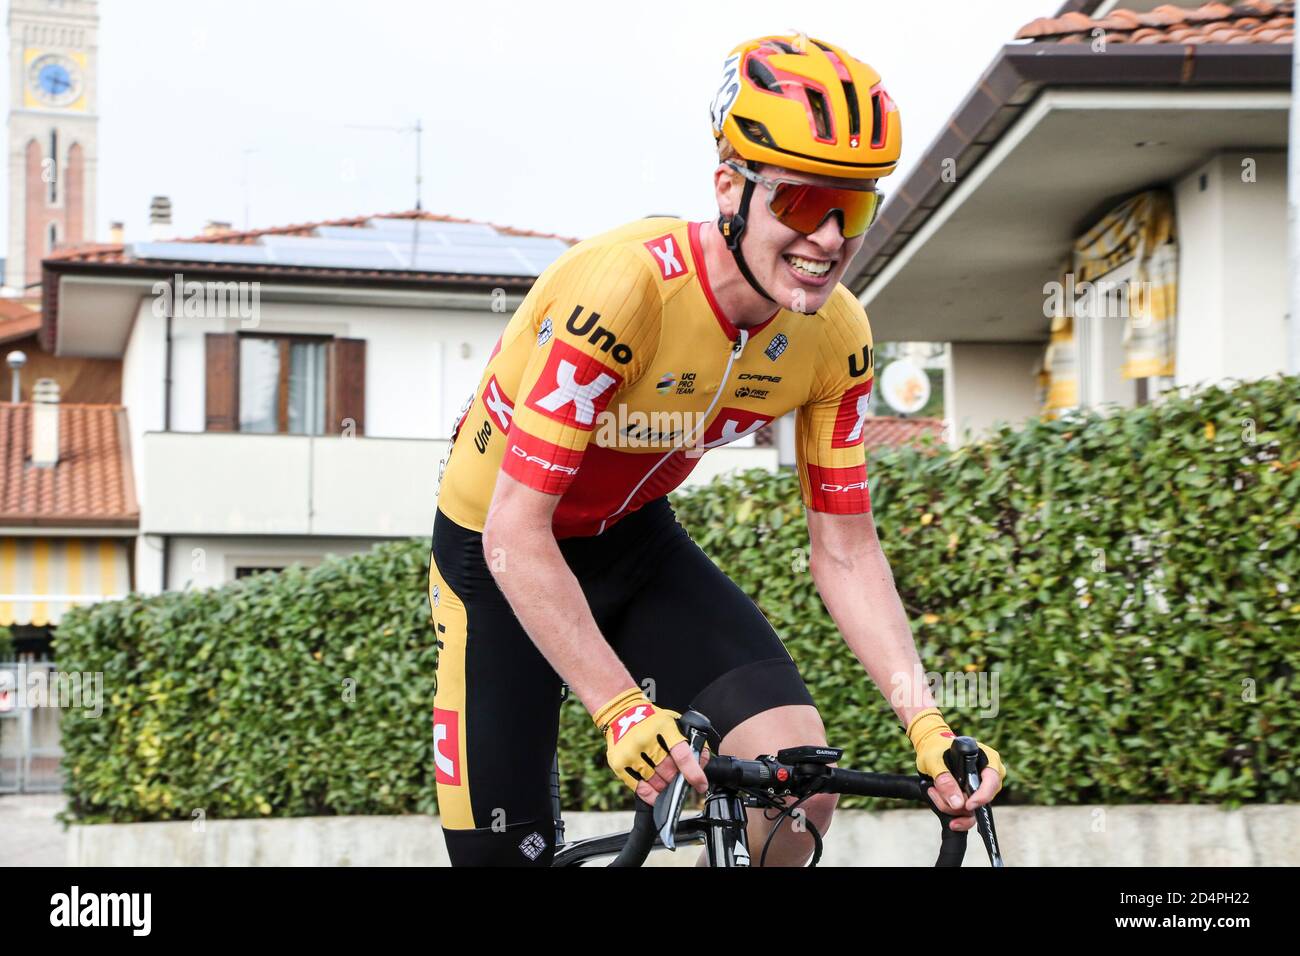 Buja, Italy. 10th Oct, 2020. buja, Italy, 10 Oct 2020, Andreas Leknessund - Uno XPro Cycling Team racing for the leadership during Under 23 Elite - In line race - Road Race San Vito al Tagliamento - Buja - Street Cycling - Credit: LM/Luca Tedeschi Credit: Luca Tedeschi/LPS/ZUMA Wire/Alamy Live News Stock Photo